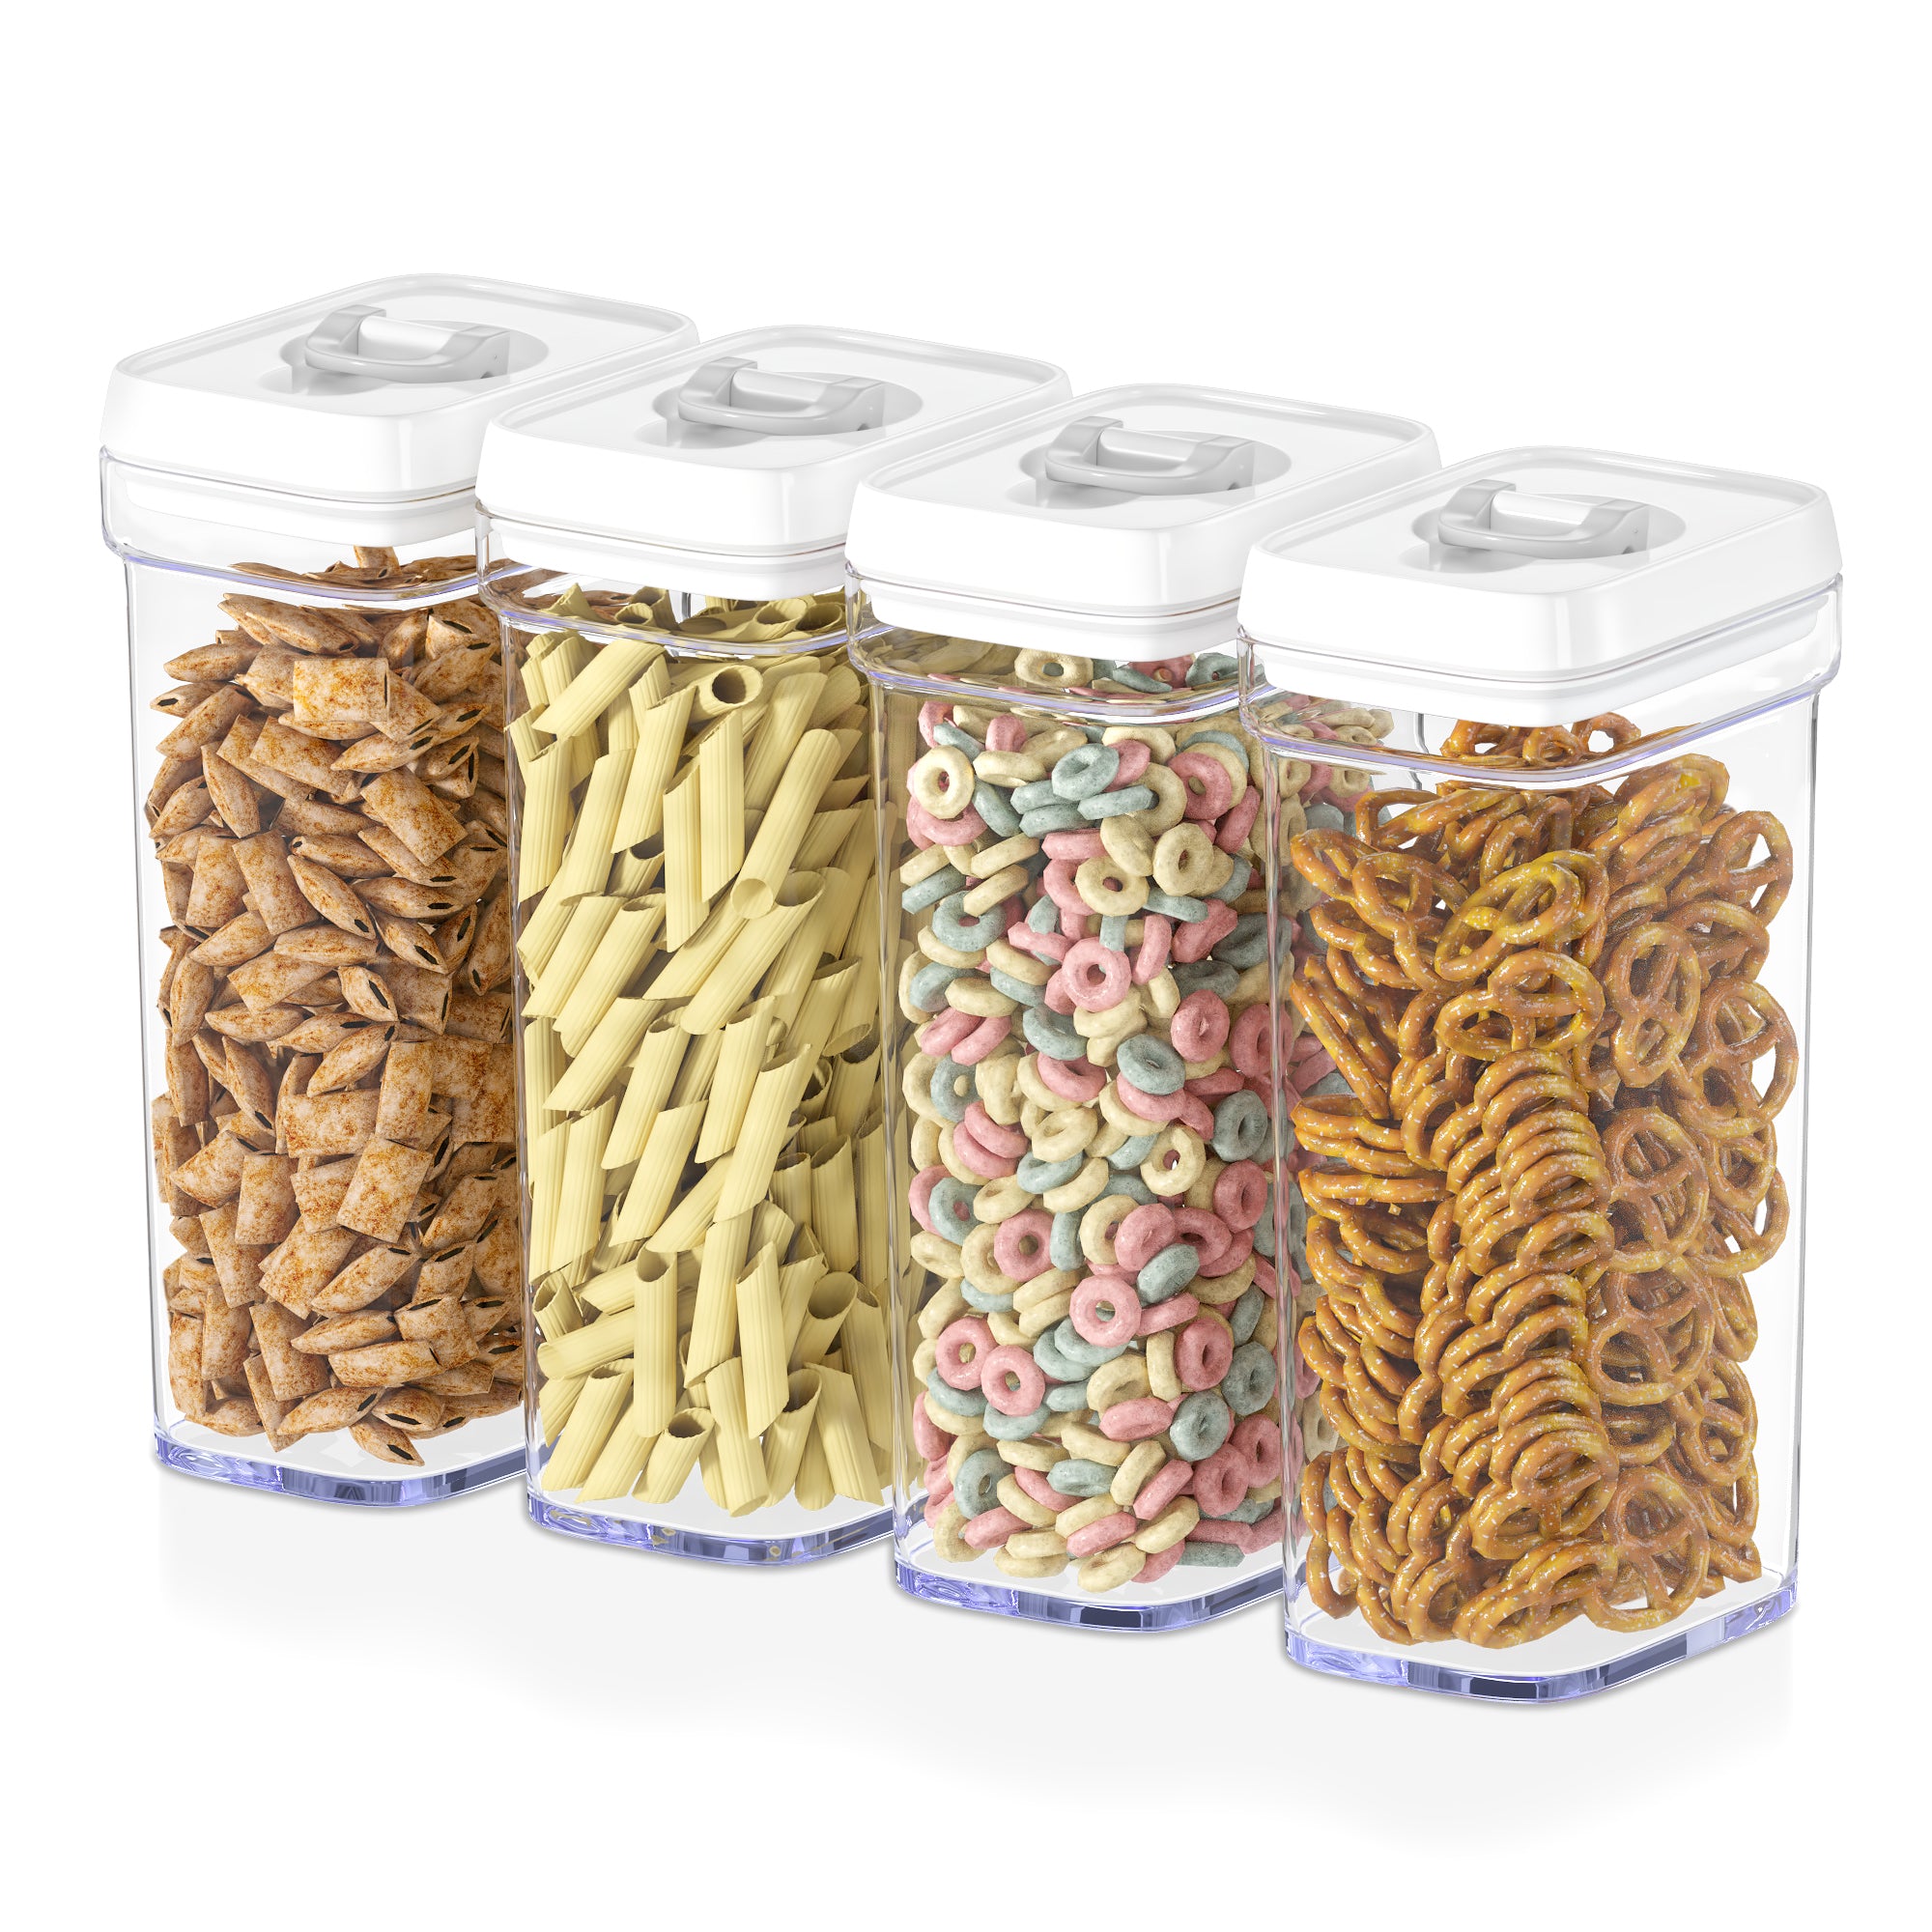  Airtight Food Storage Containers - Set of 4PC Kitchen